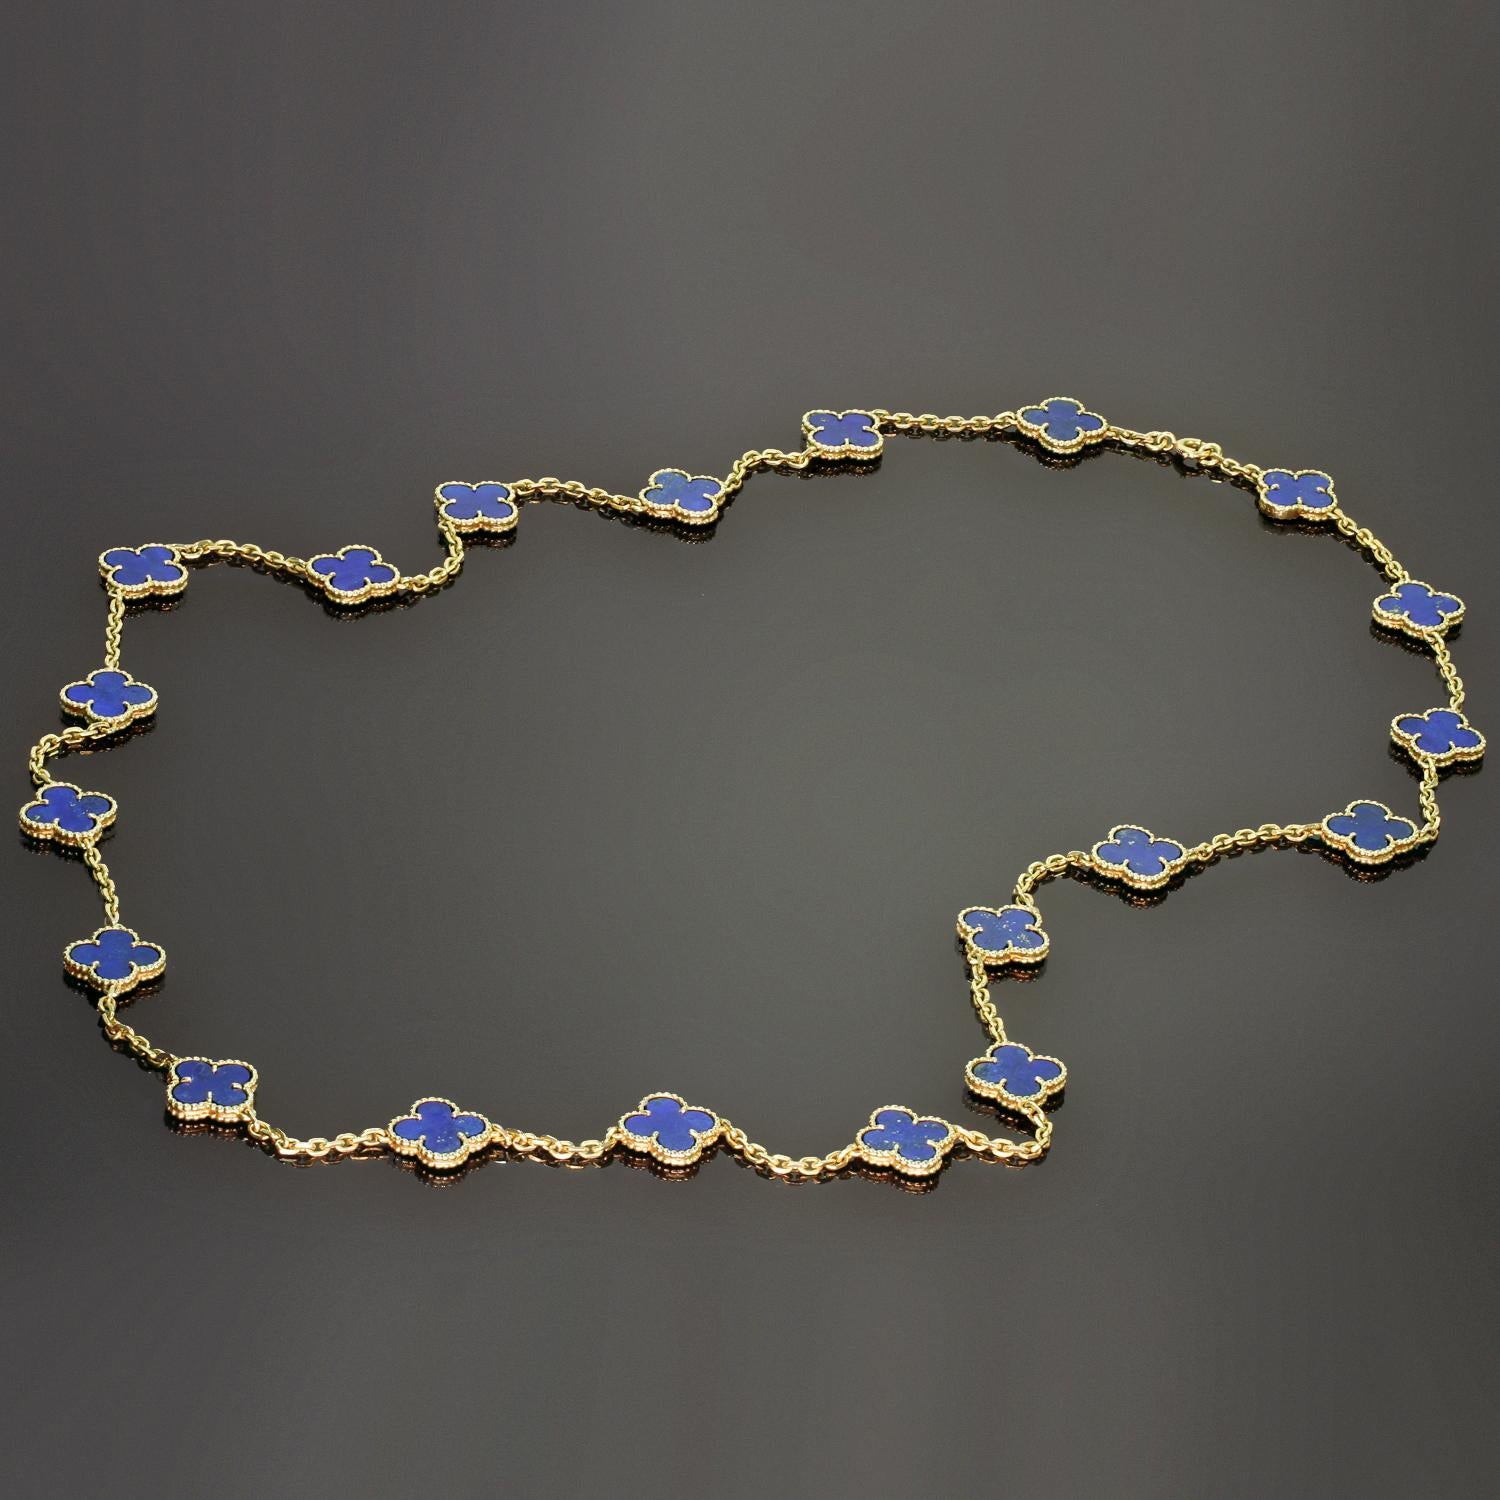 VAN CLEEF & ARPELS Alhambra 20 Motifs Lapis Lazuli 18k YG VCA Certified Necklace In Good Condition For Sale In New York, NY